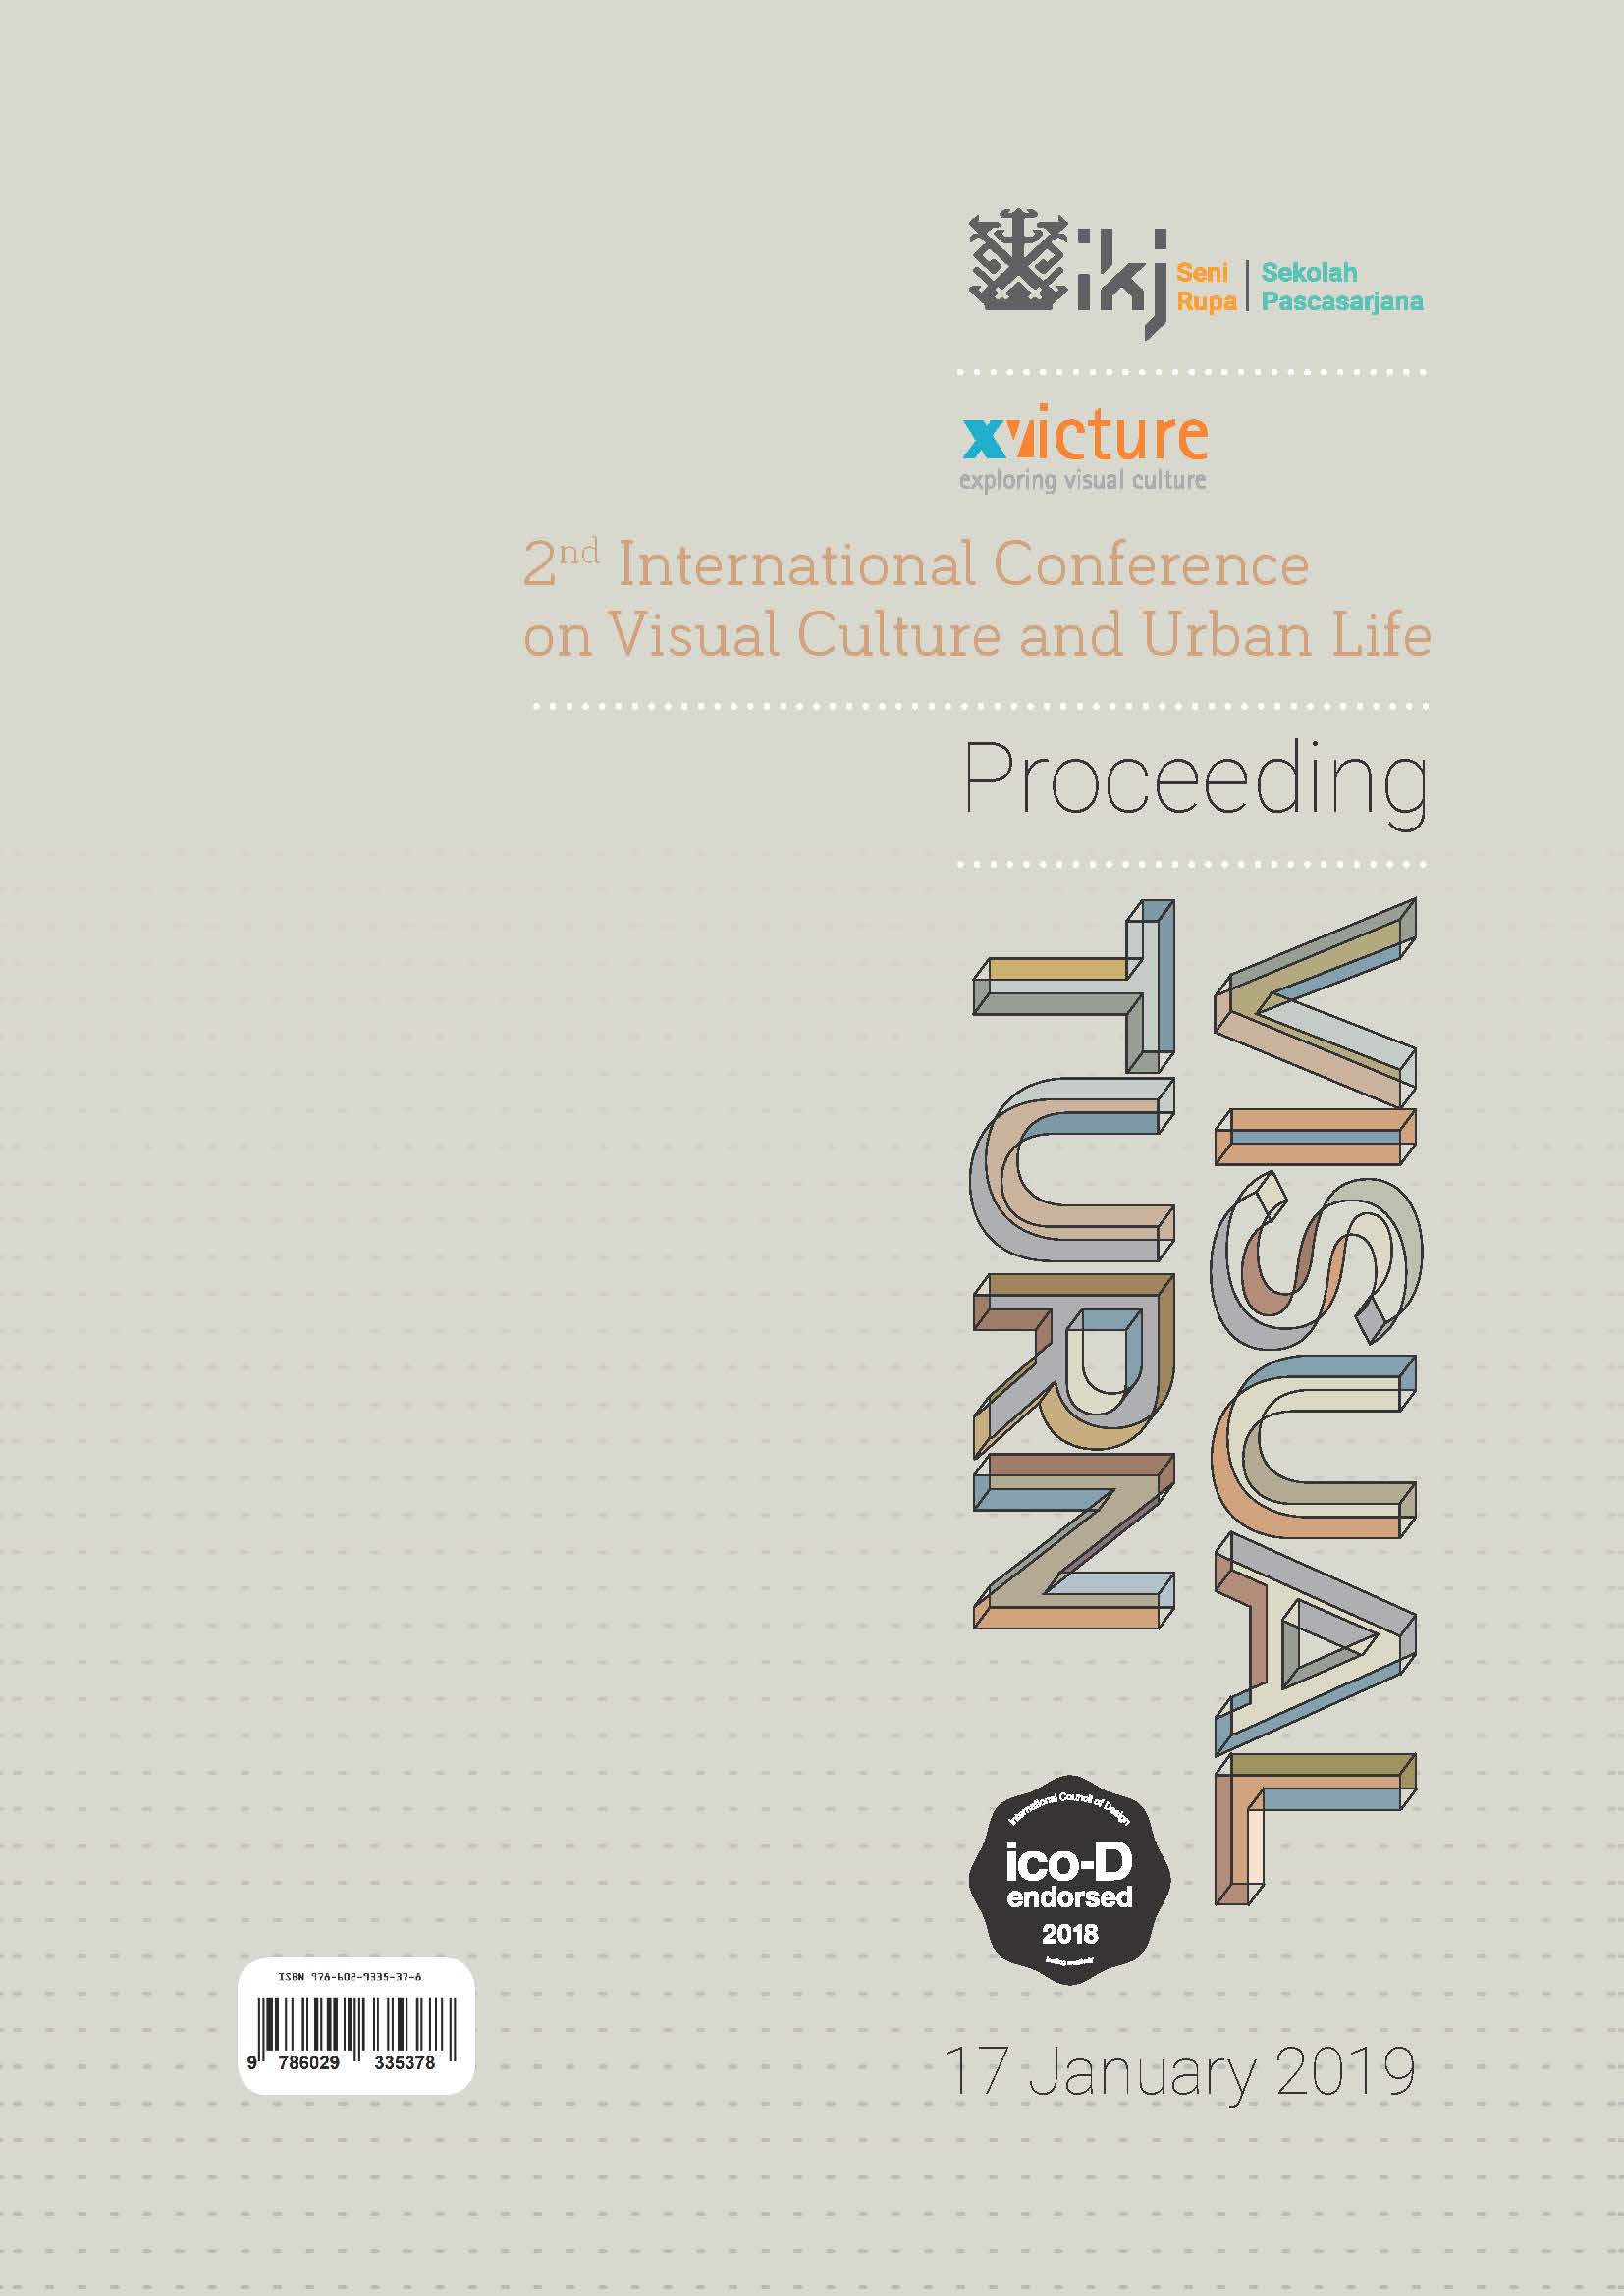 					View 2019: Proceeding of 2nd International Conference on Visual Culture and Urban Life
				